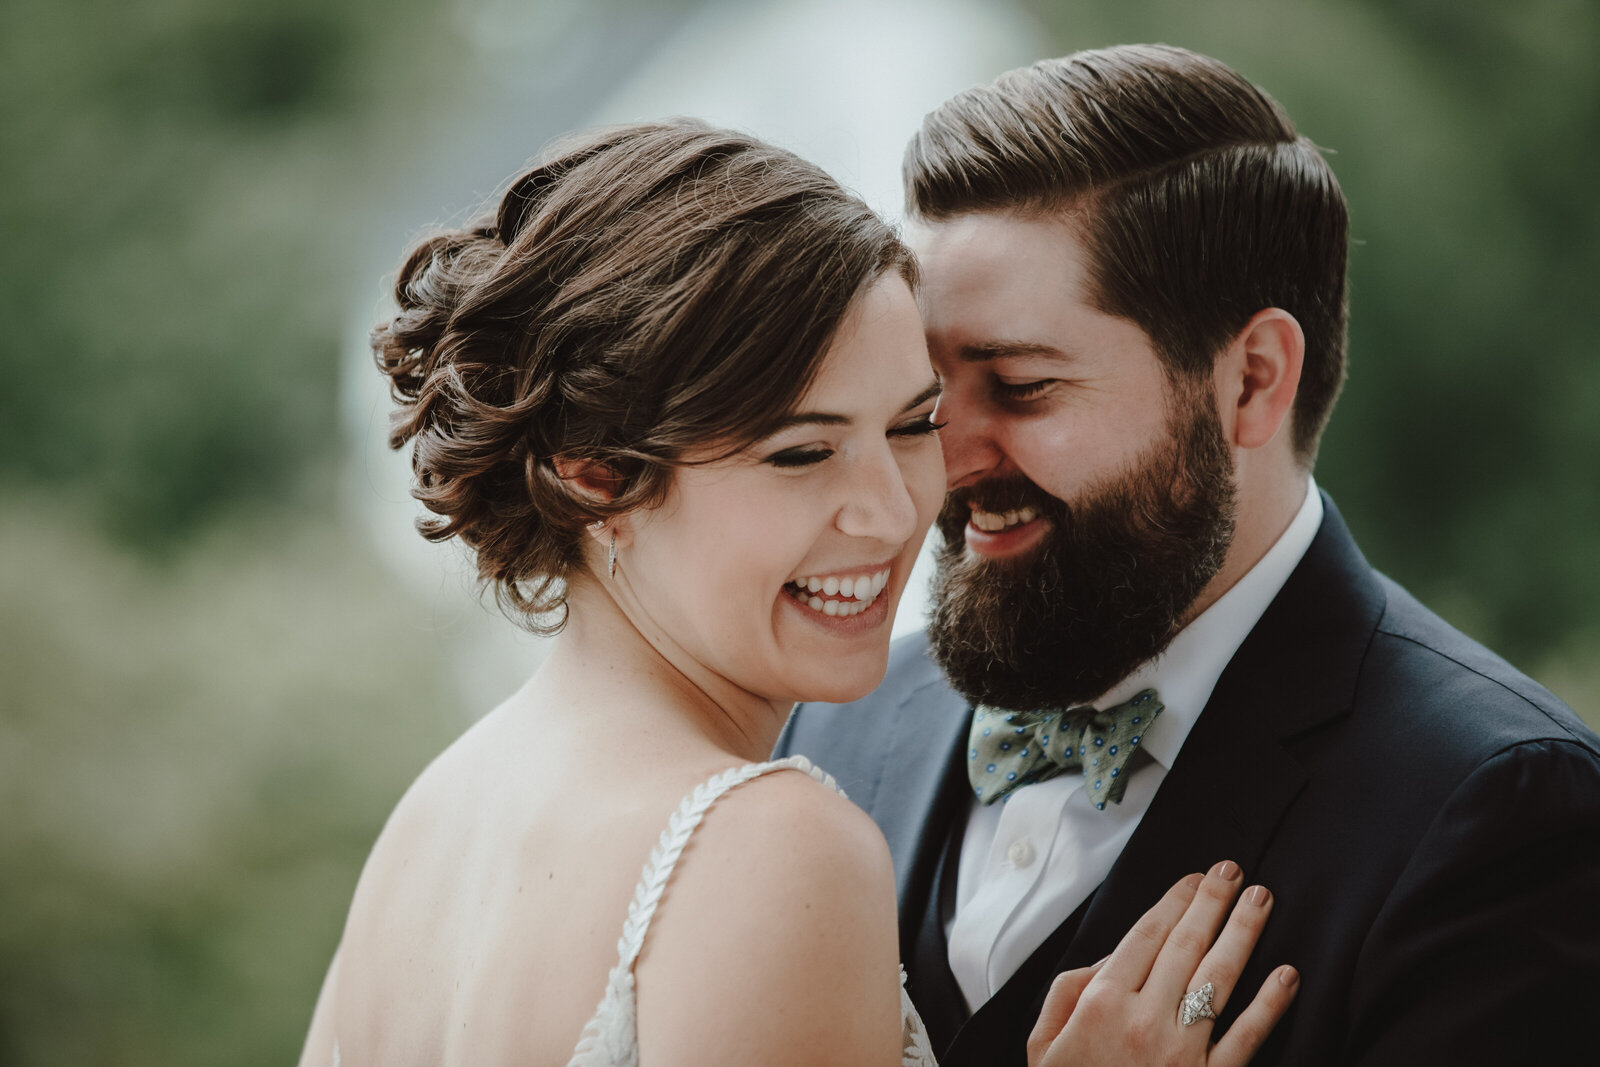 A bride and groom face each other and laugh